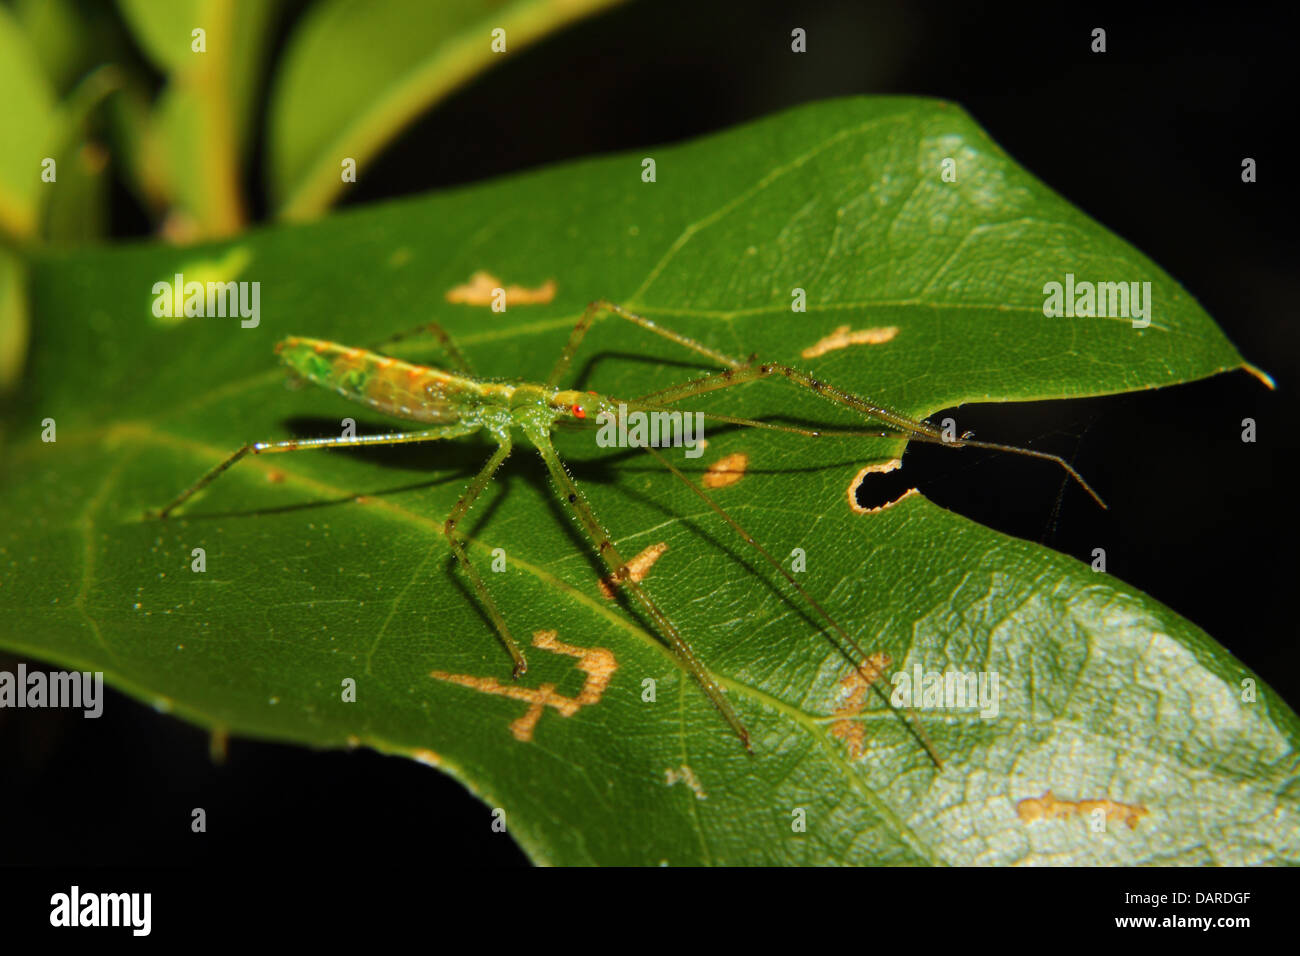 A green Assassin bug with red eyes and long legs perches on a green leaf. Stock Photo